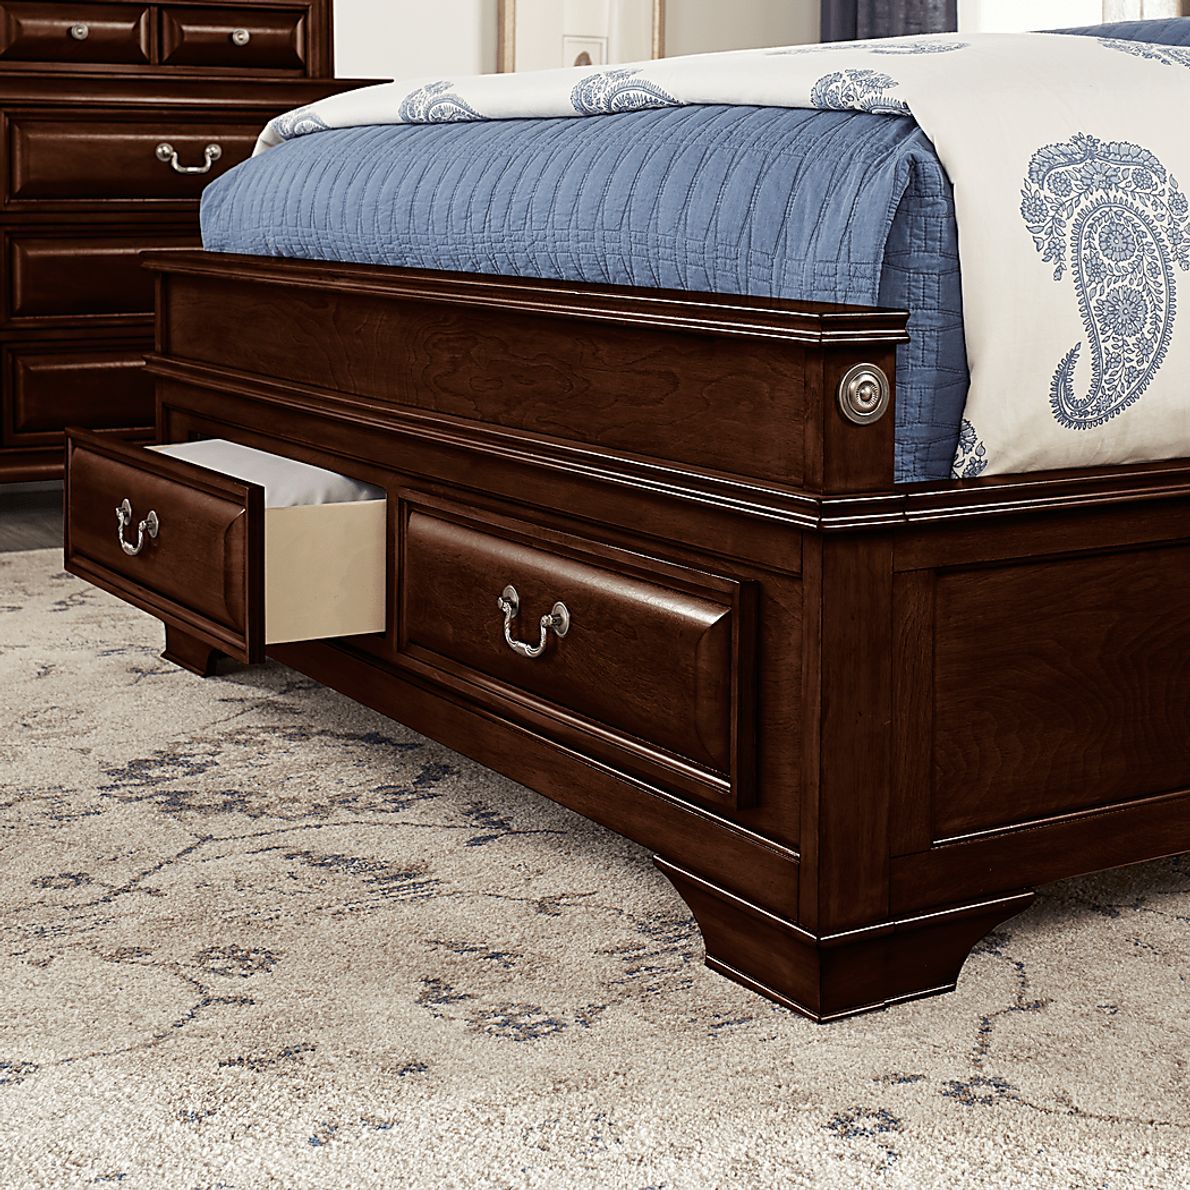 Mill Valley II Brown Cherry 5 Pc Queen Sleigh Bedroom with Storage